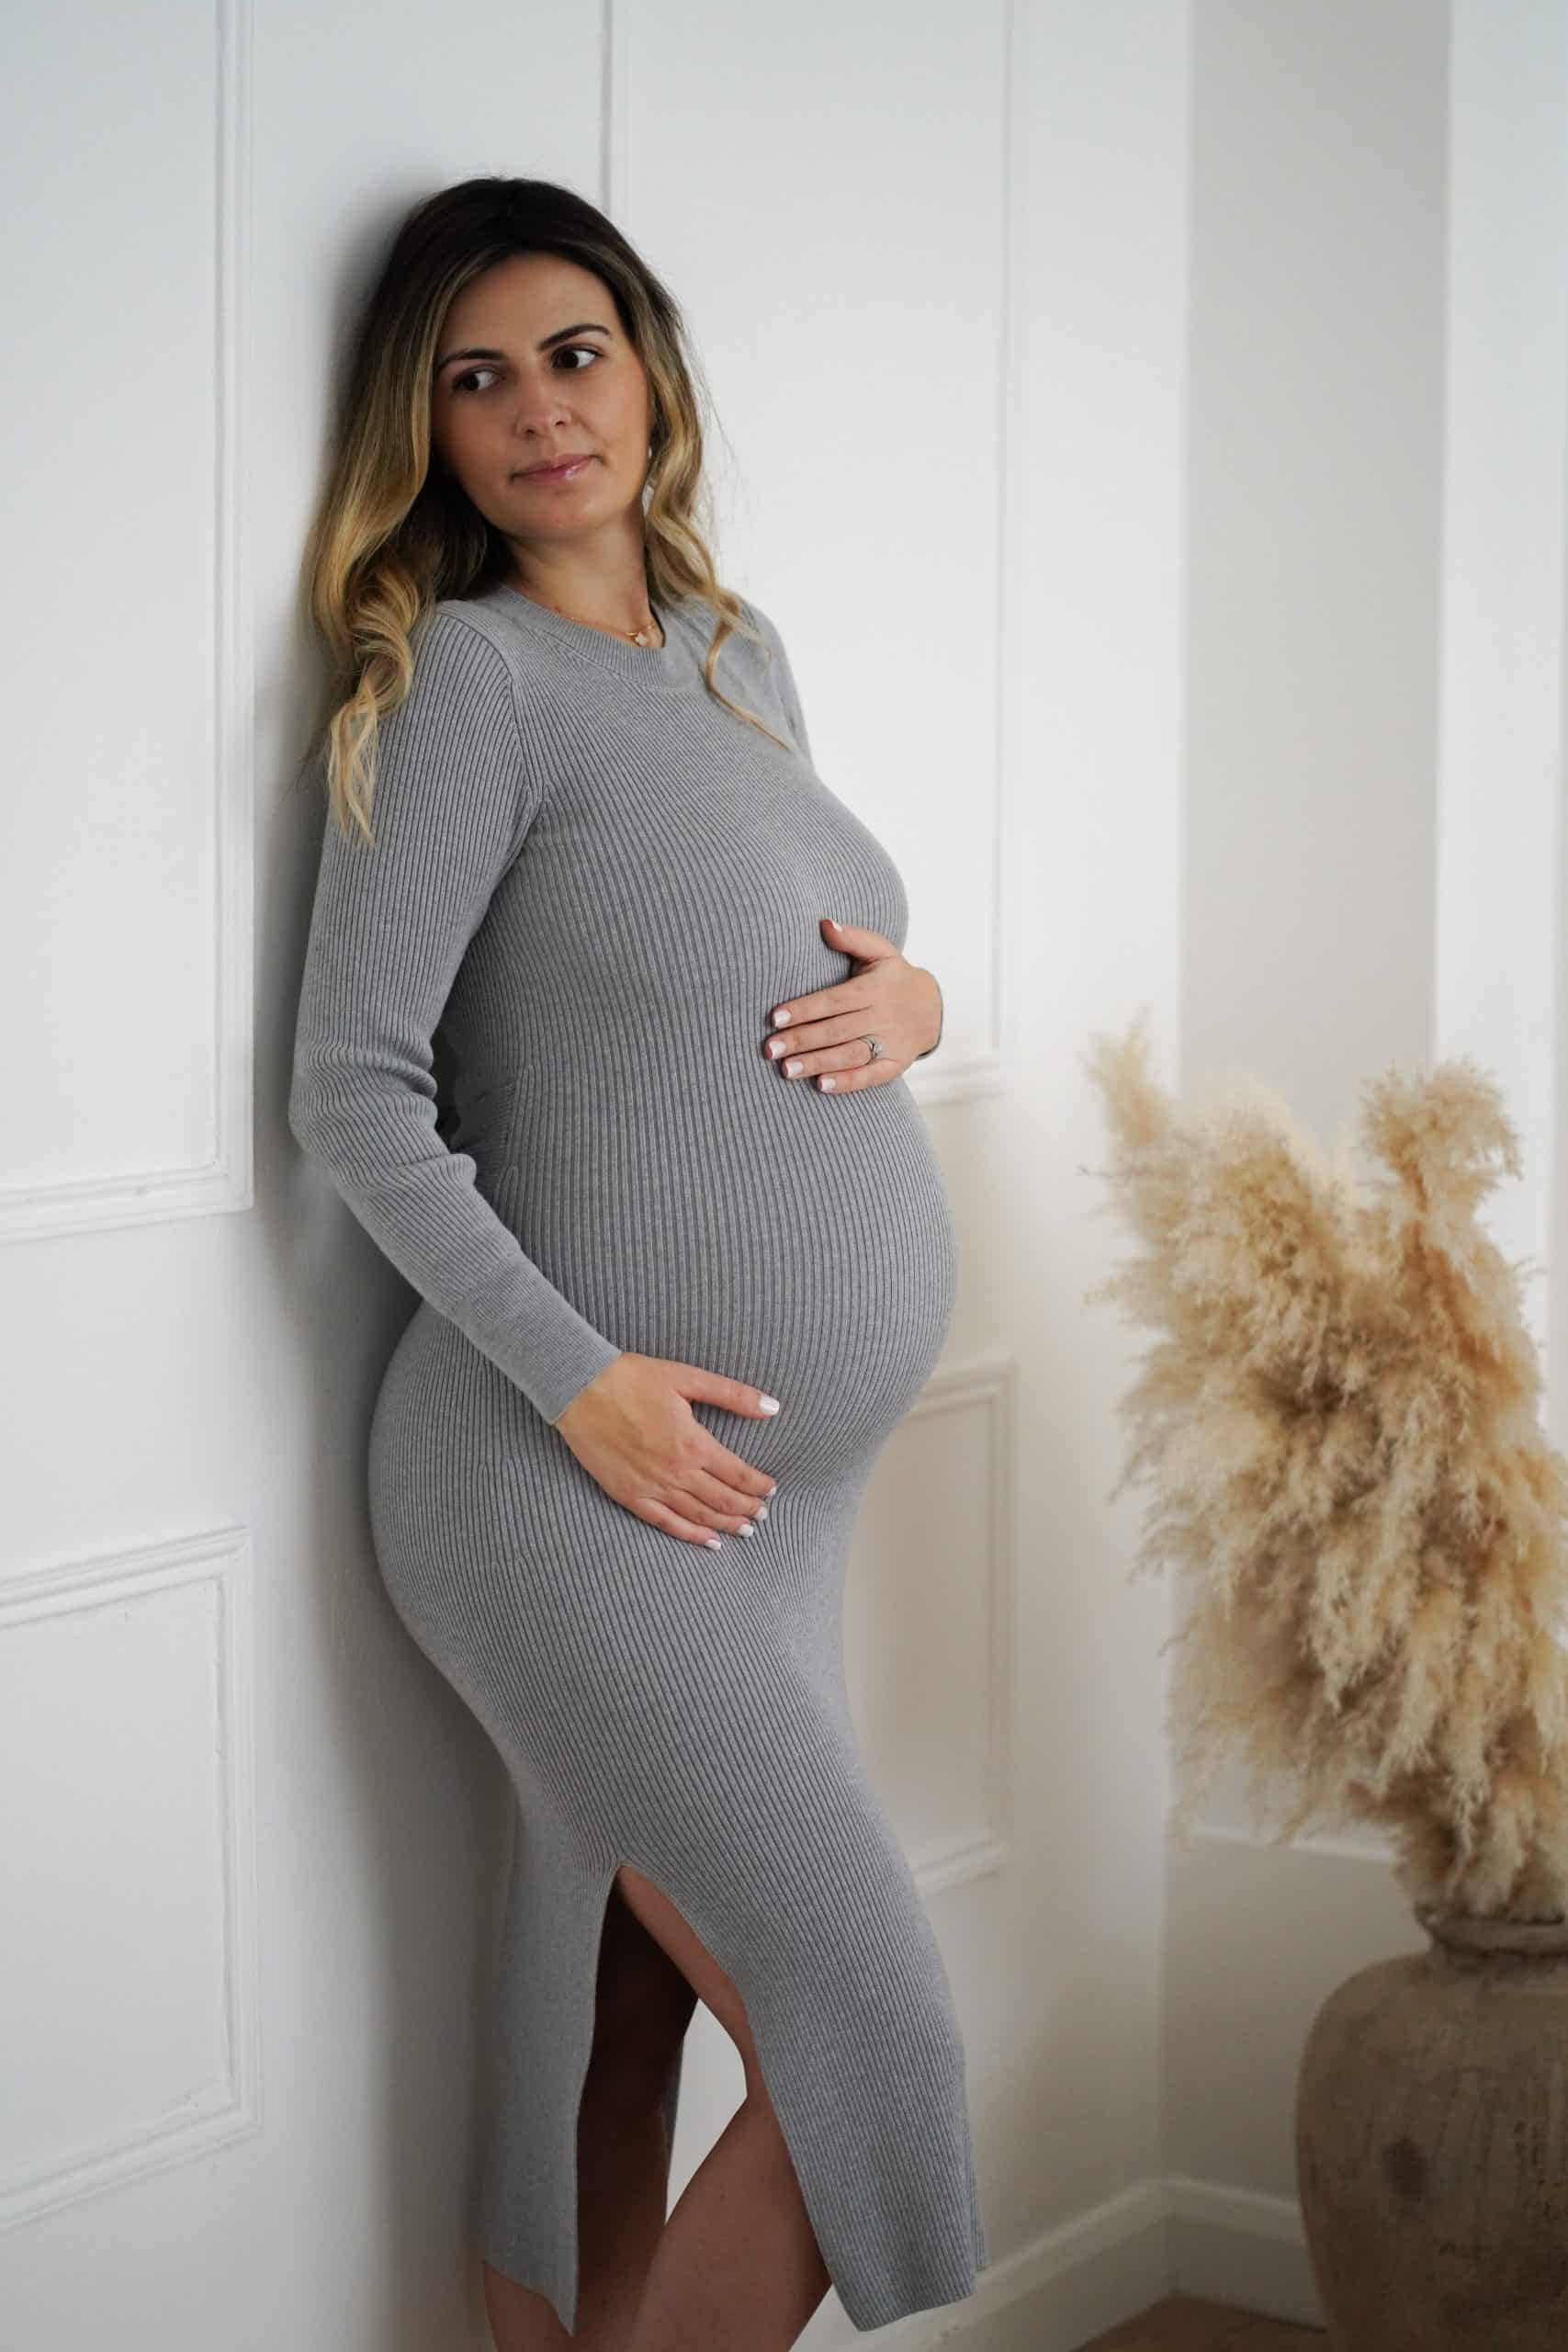 london maternity photography image of pregnant woman in grey dress